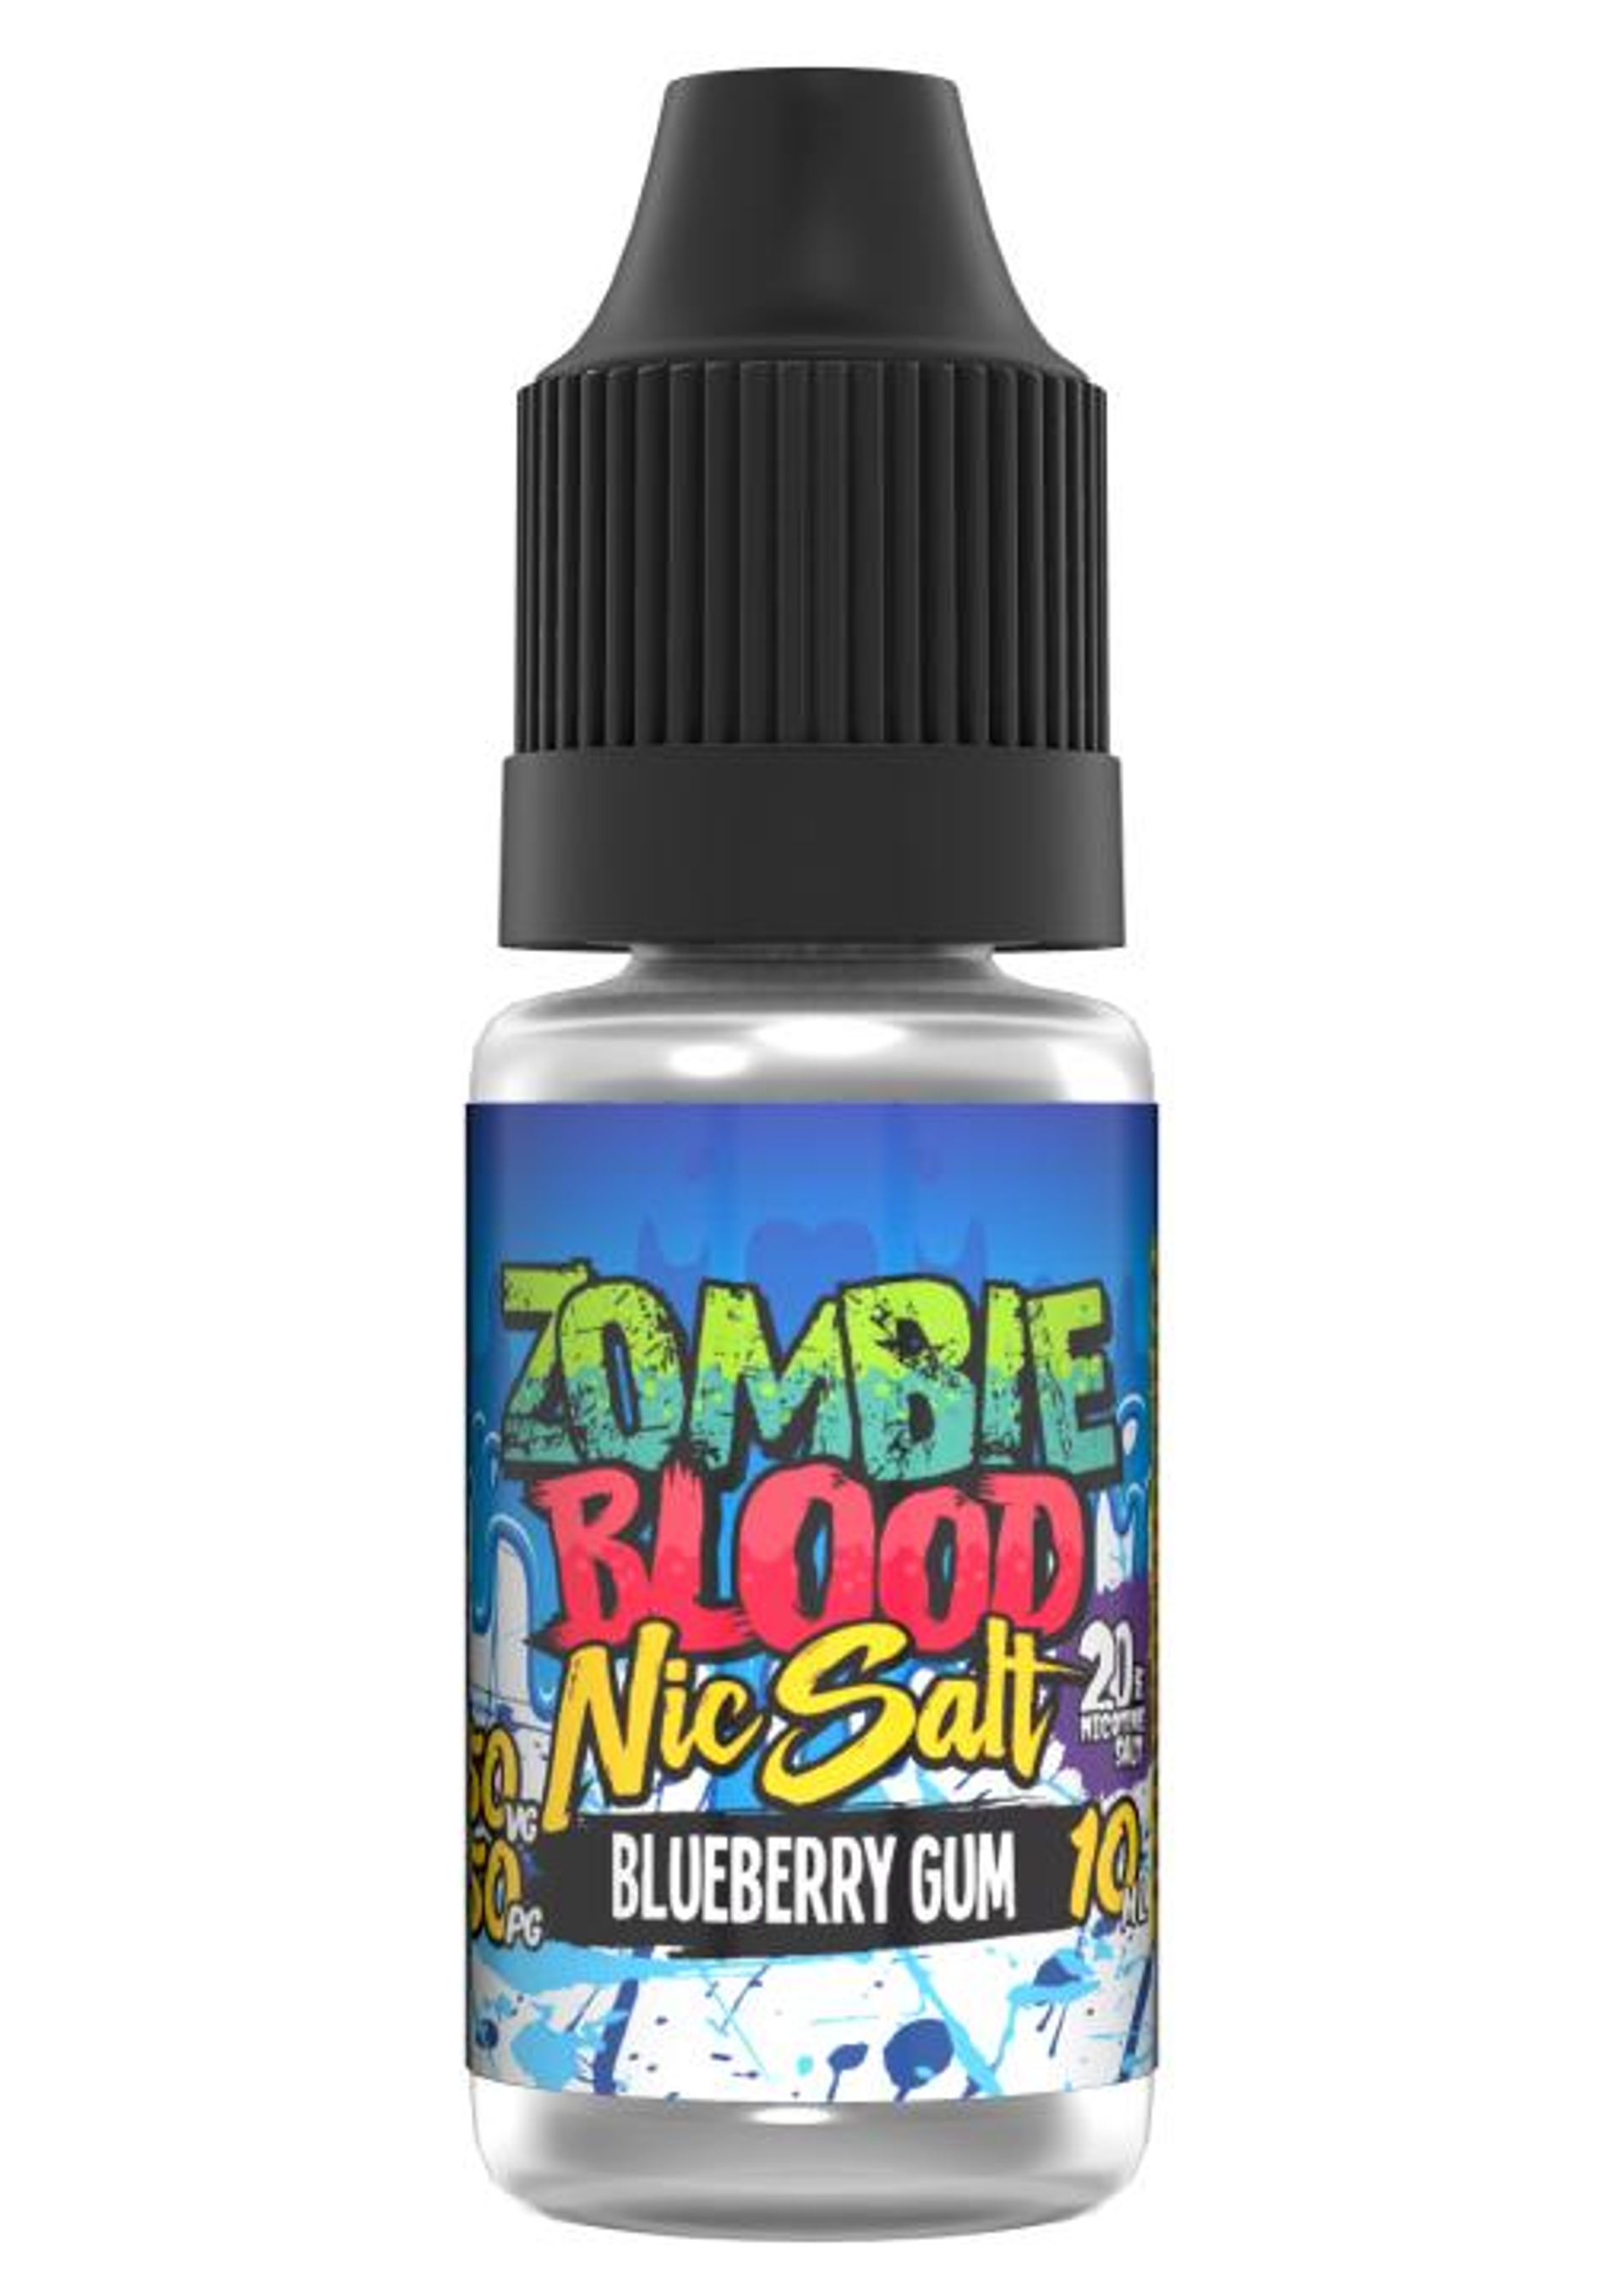 Image of Blueberry Gum by Zombie Blood